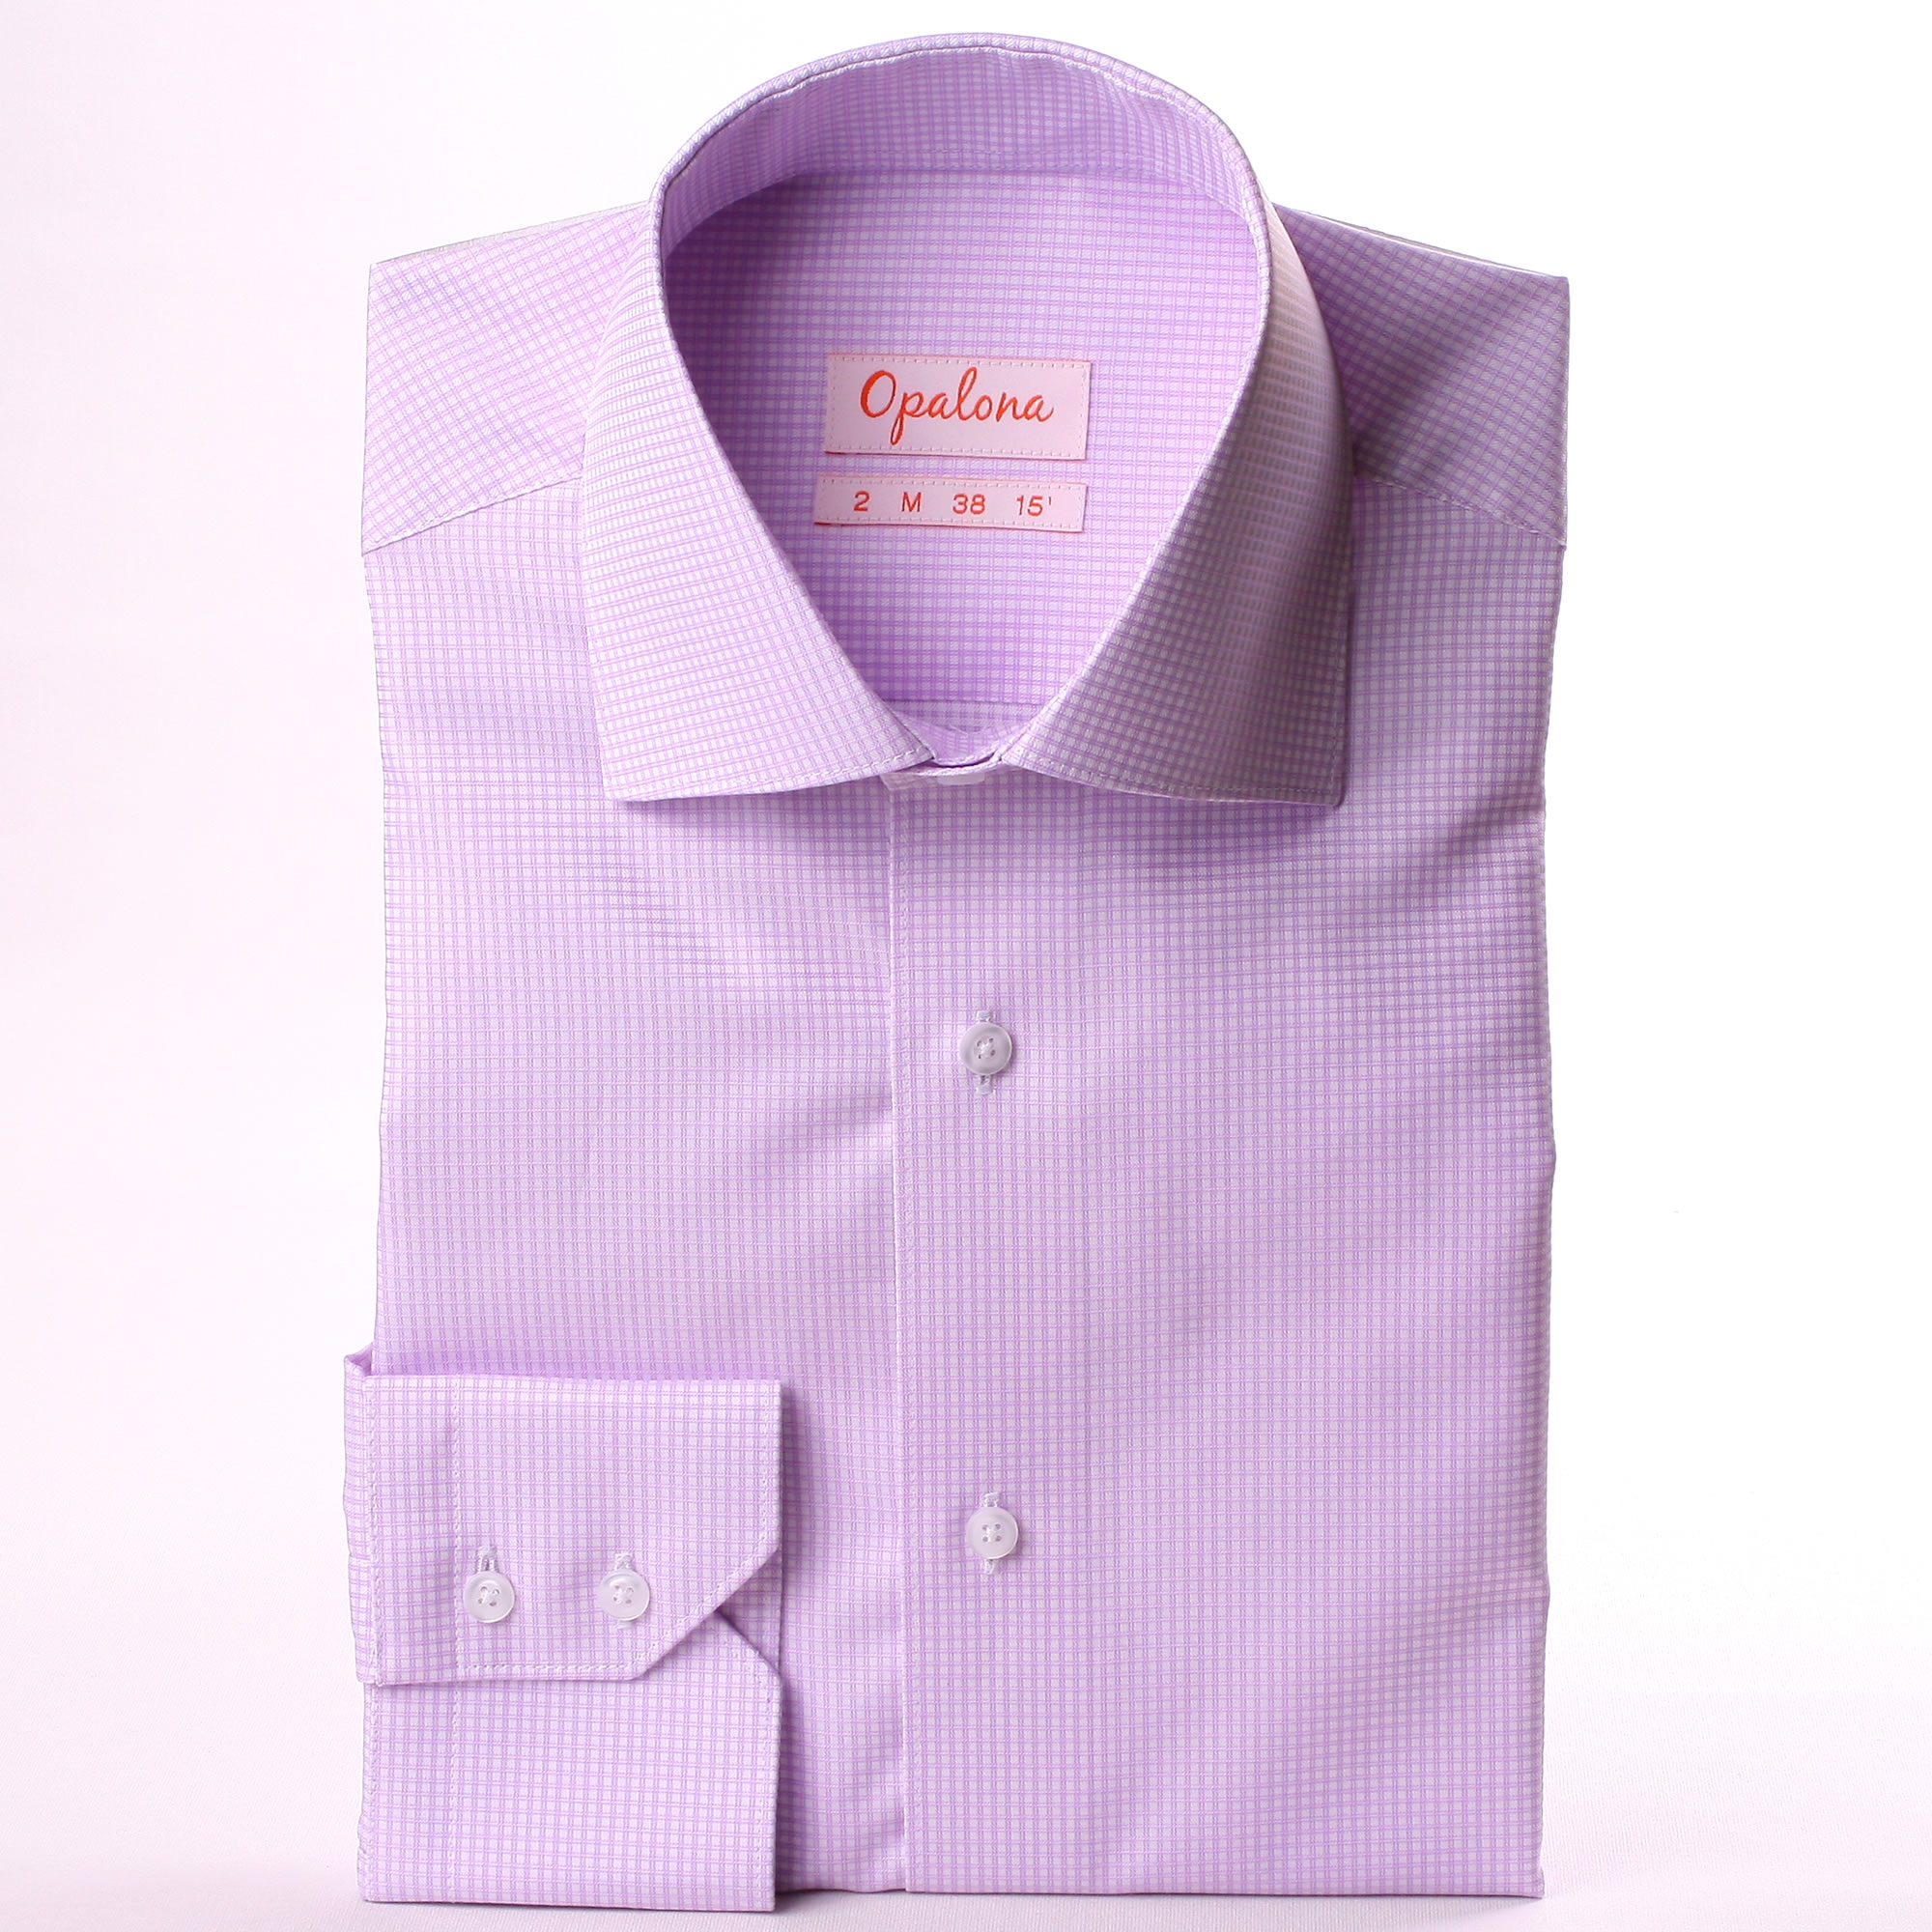 White and lilac gingham shirt